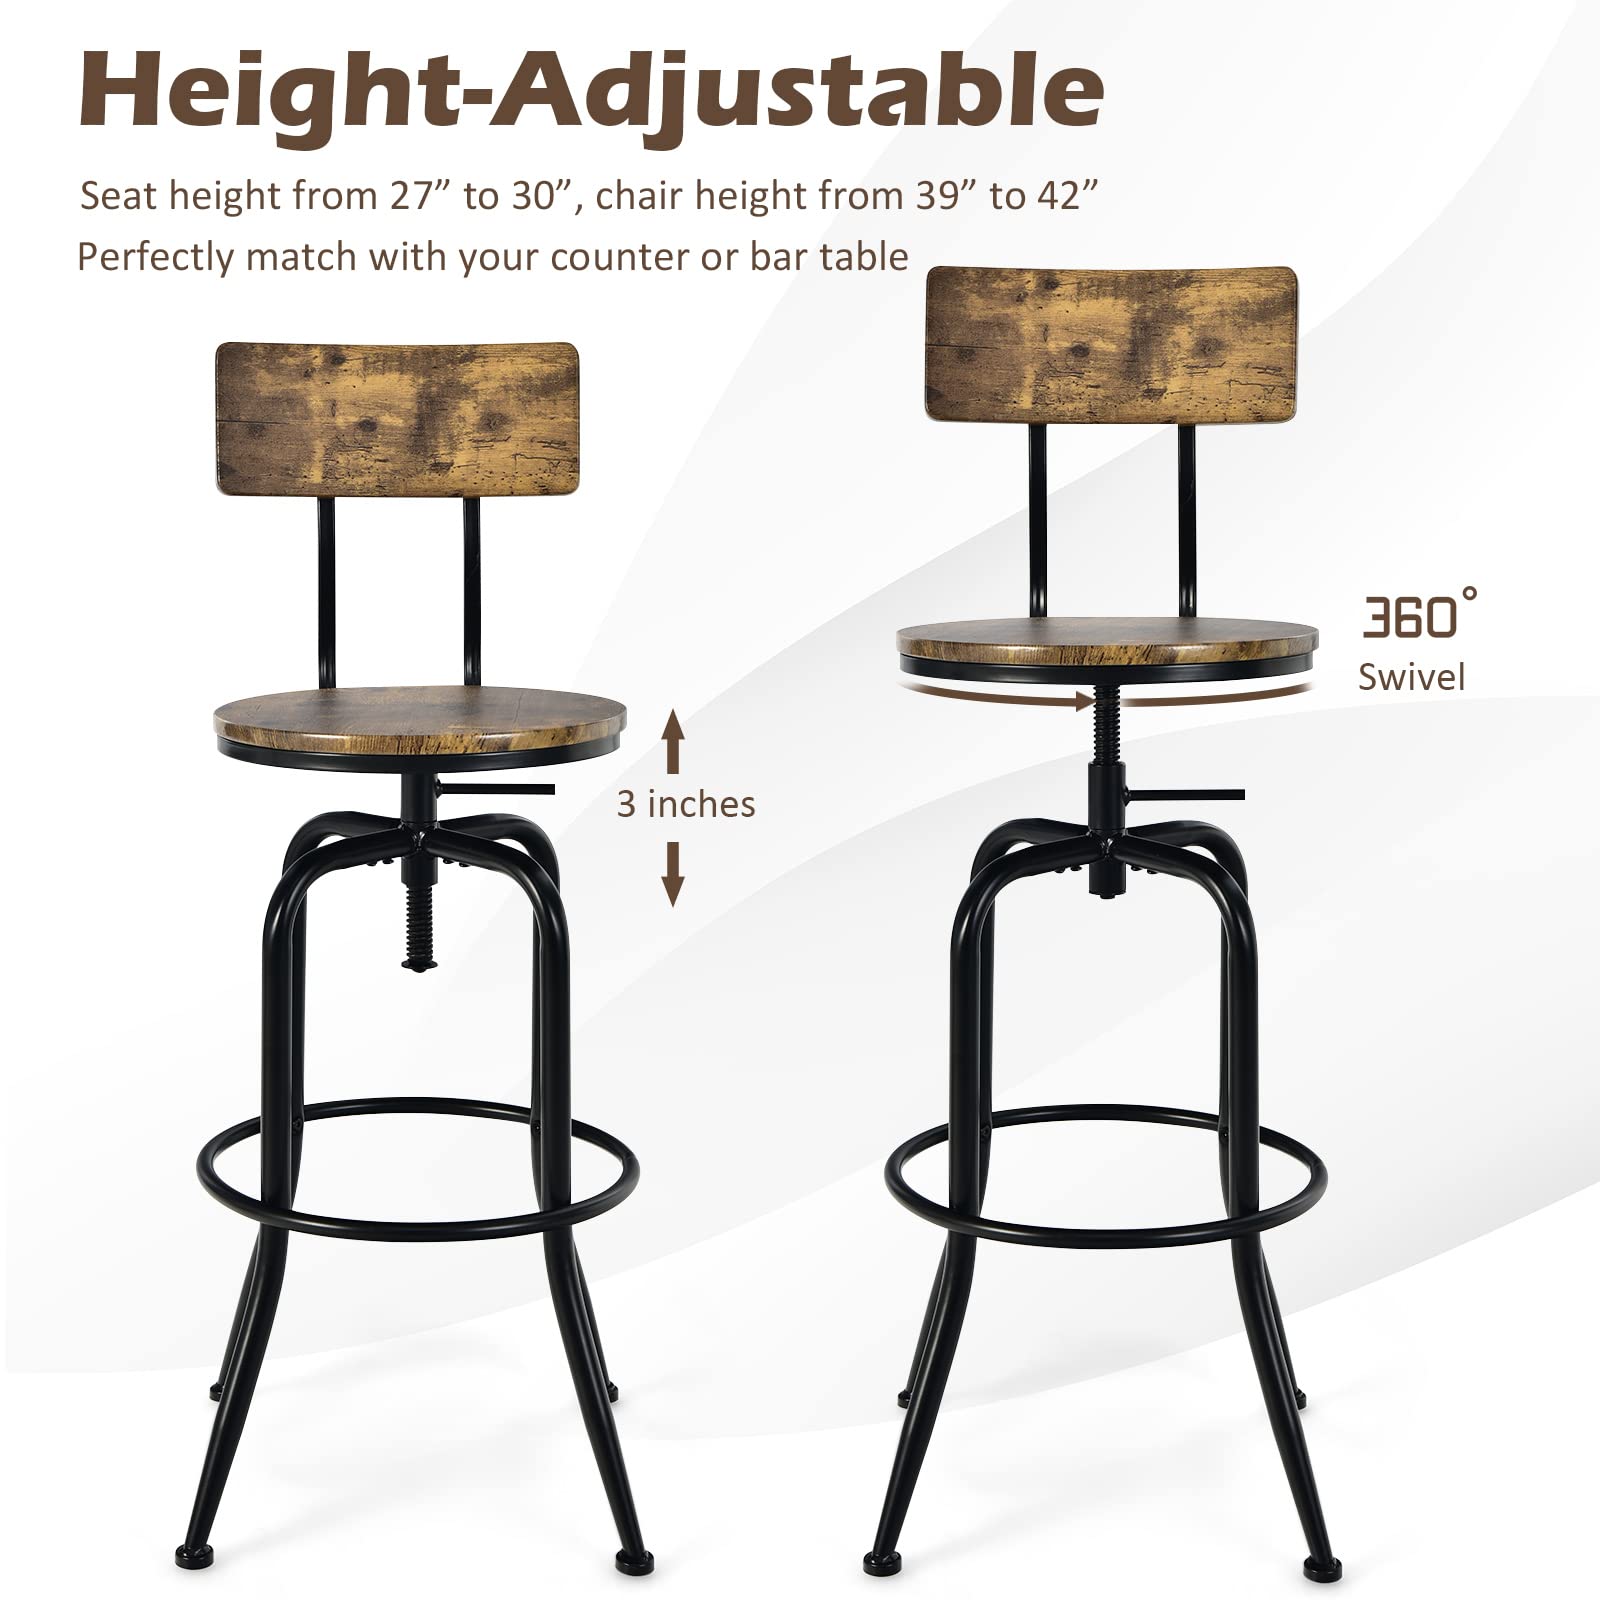 Industrial Bar Stool, Vintage Adjustable Swivel Counter Height Kitchen Dining Chair with Arc-Shaped Backrest